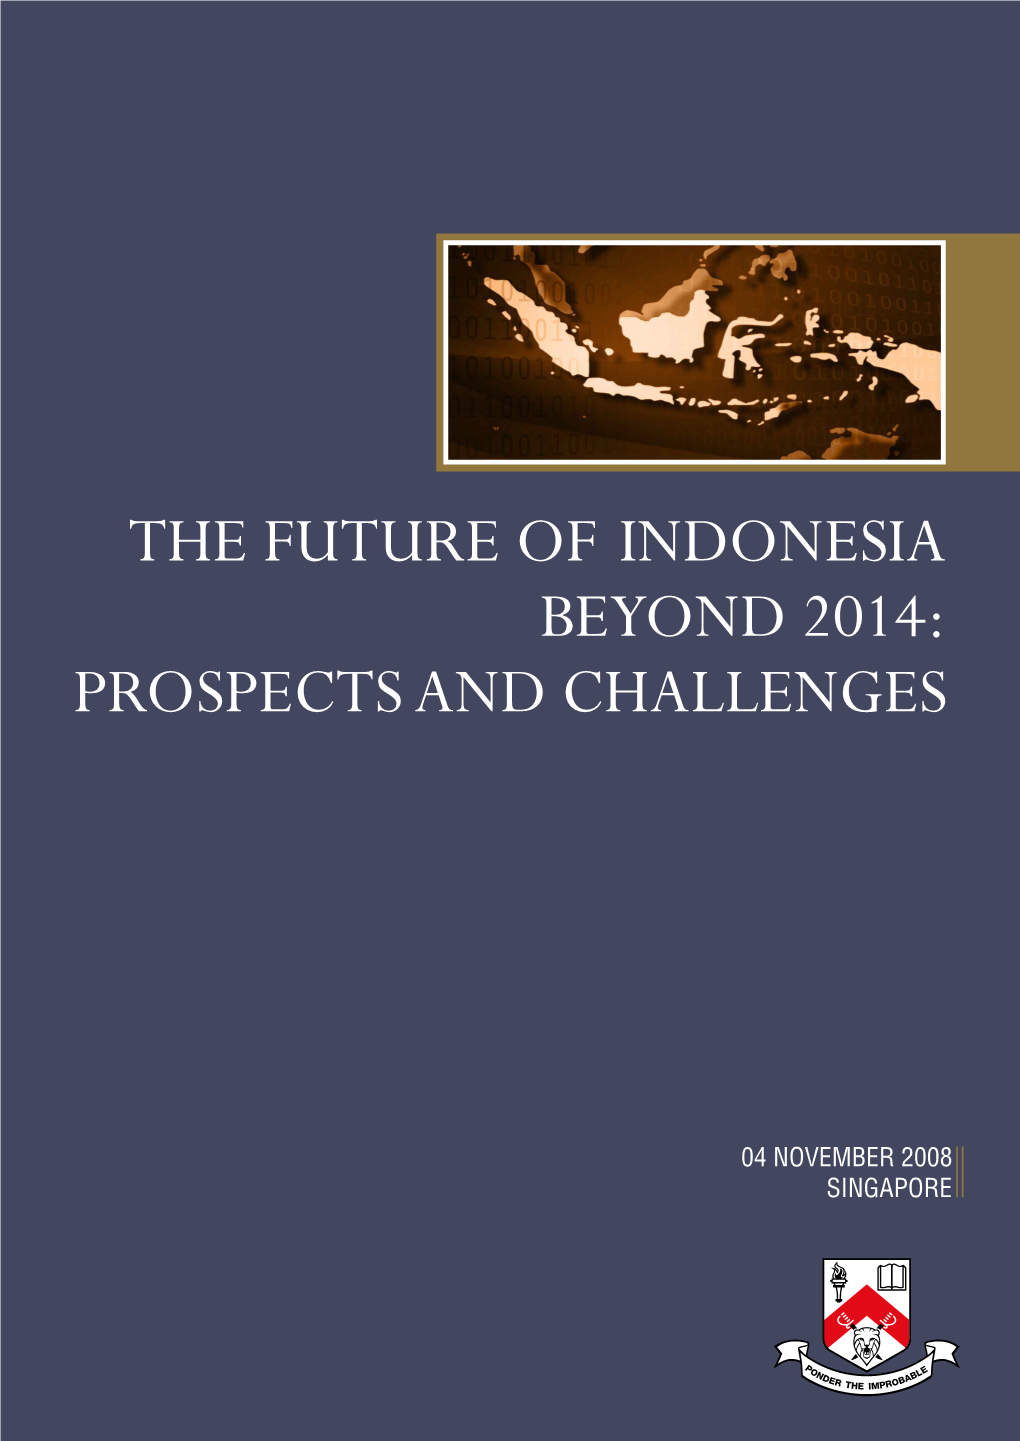 The Future of Indonesia Beyond 2014: Prospects and Challenges